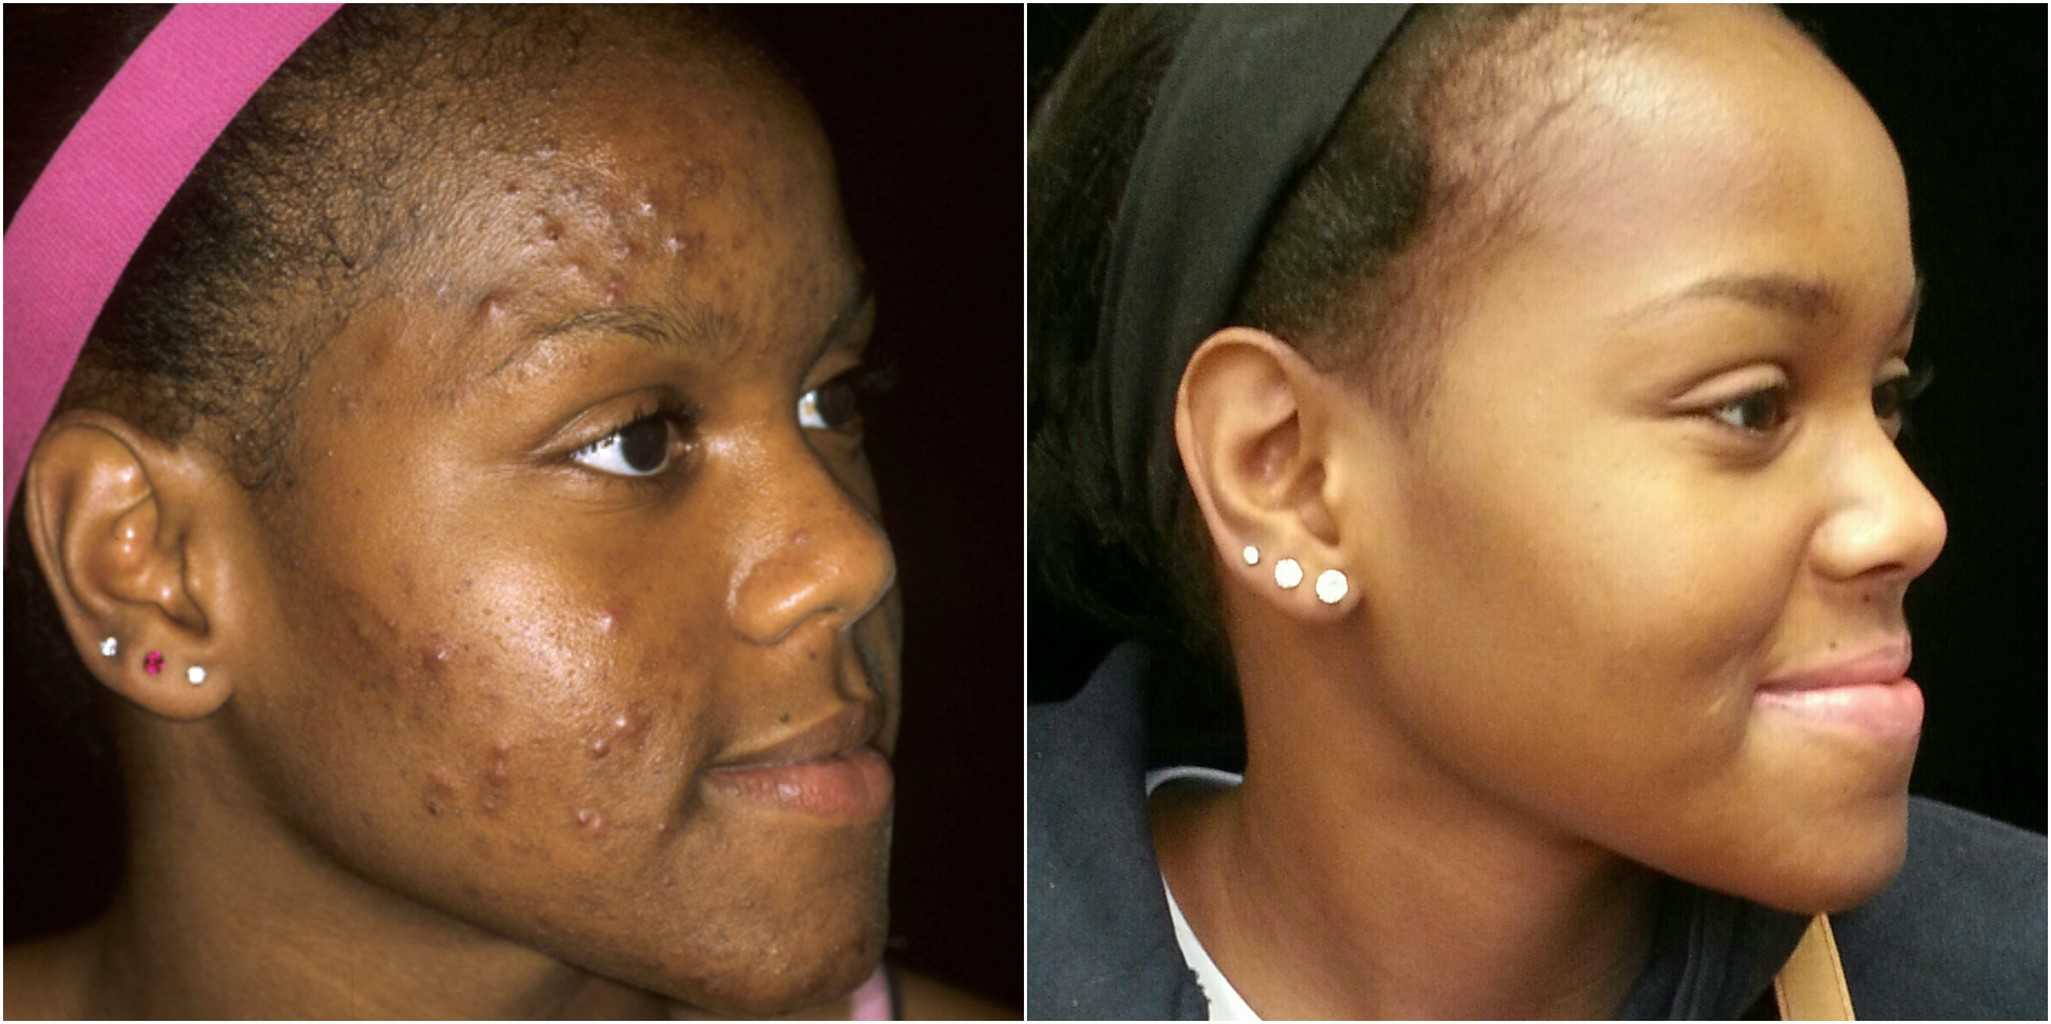 Acne affects all ages and can be treated – MSR News Online